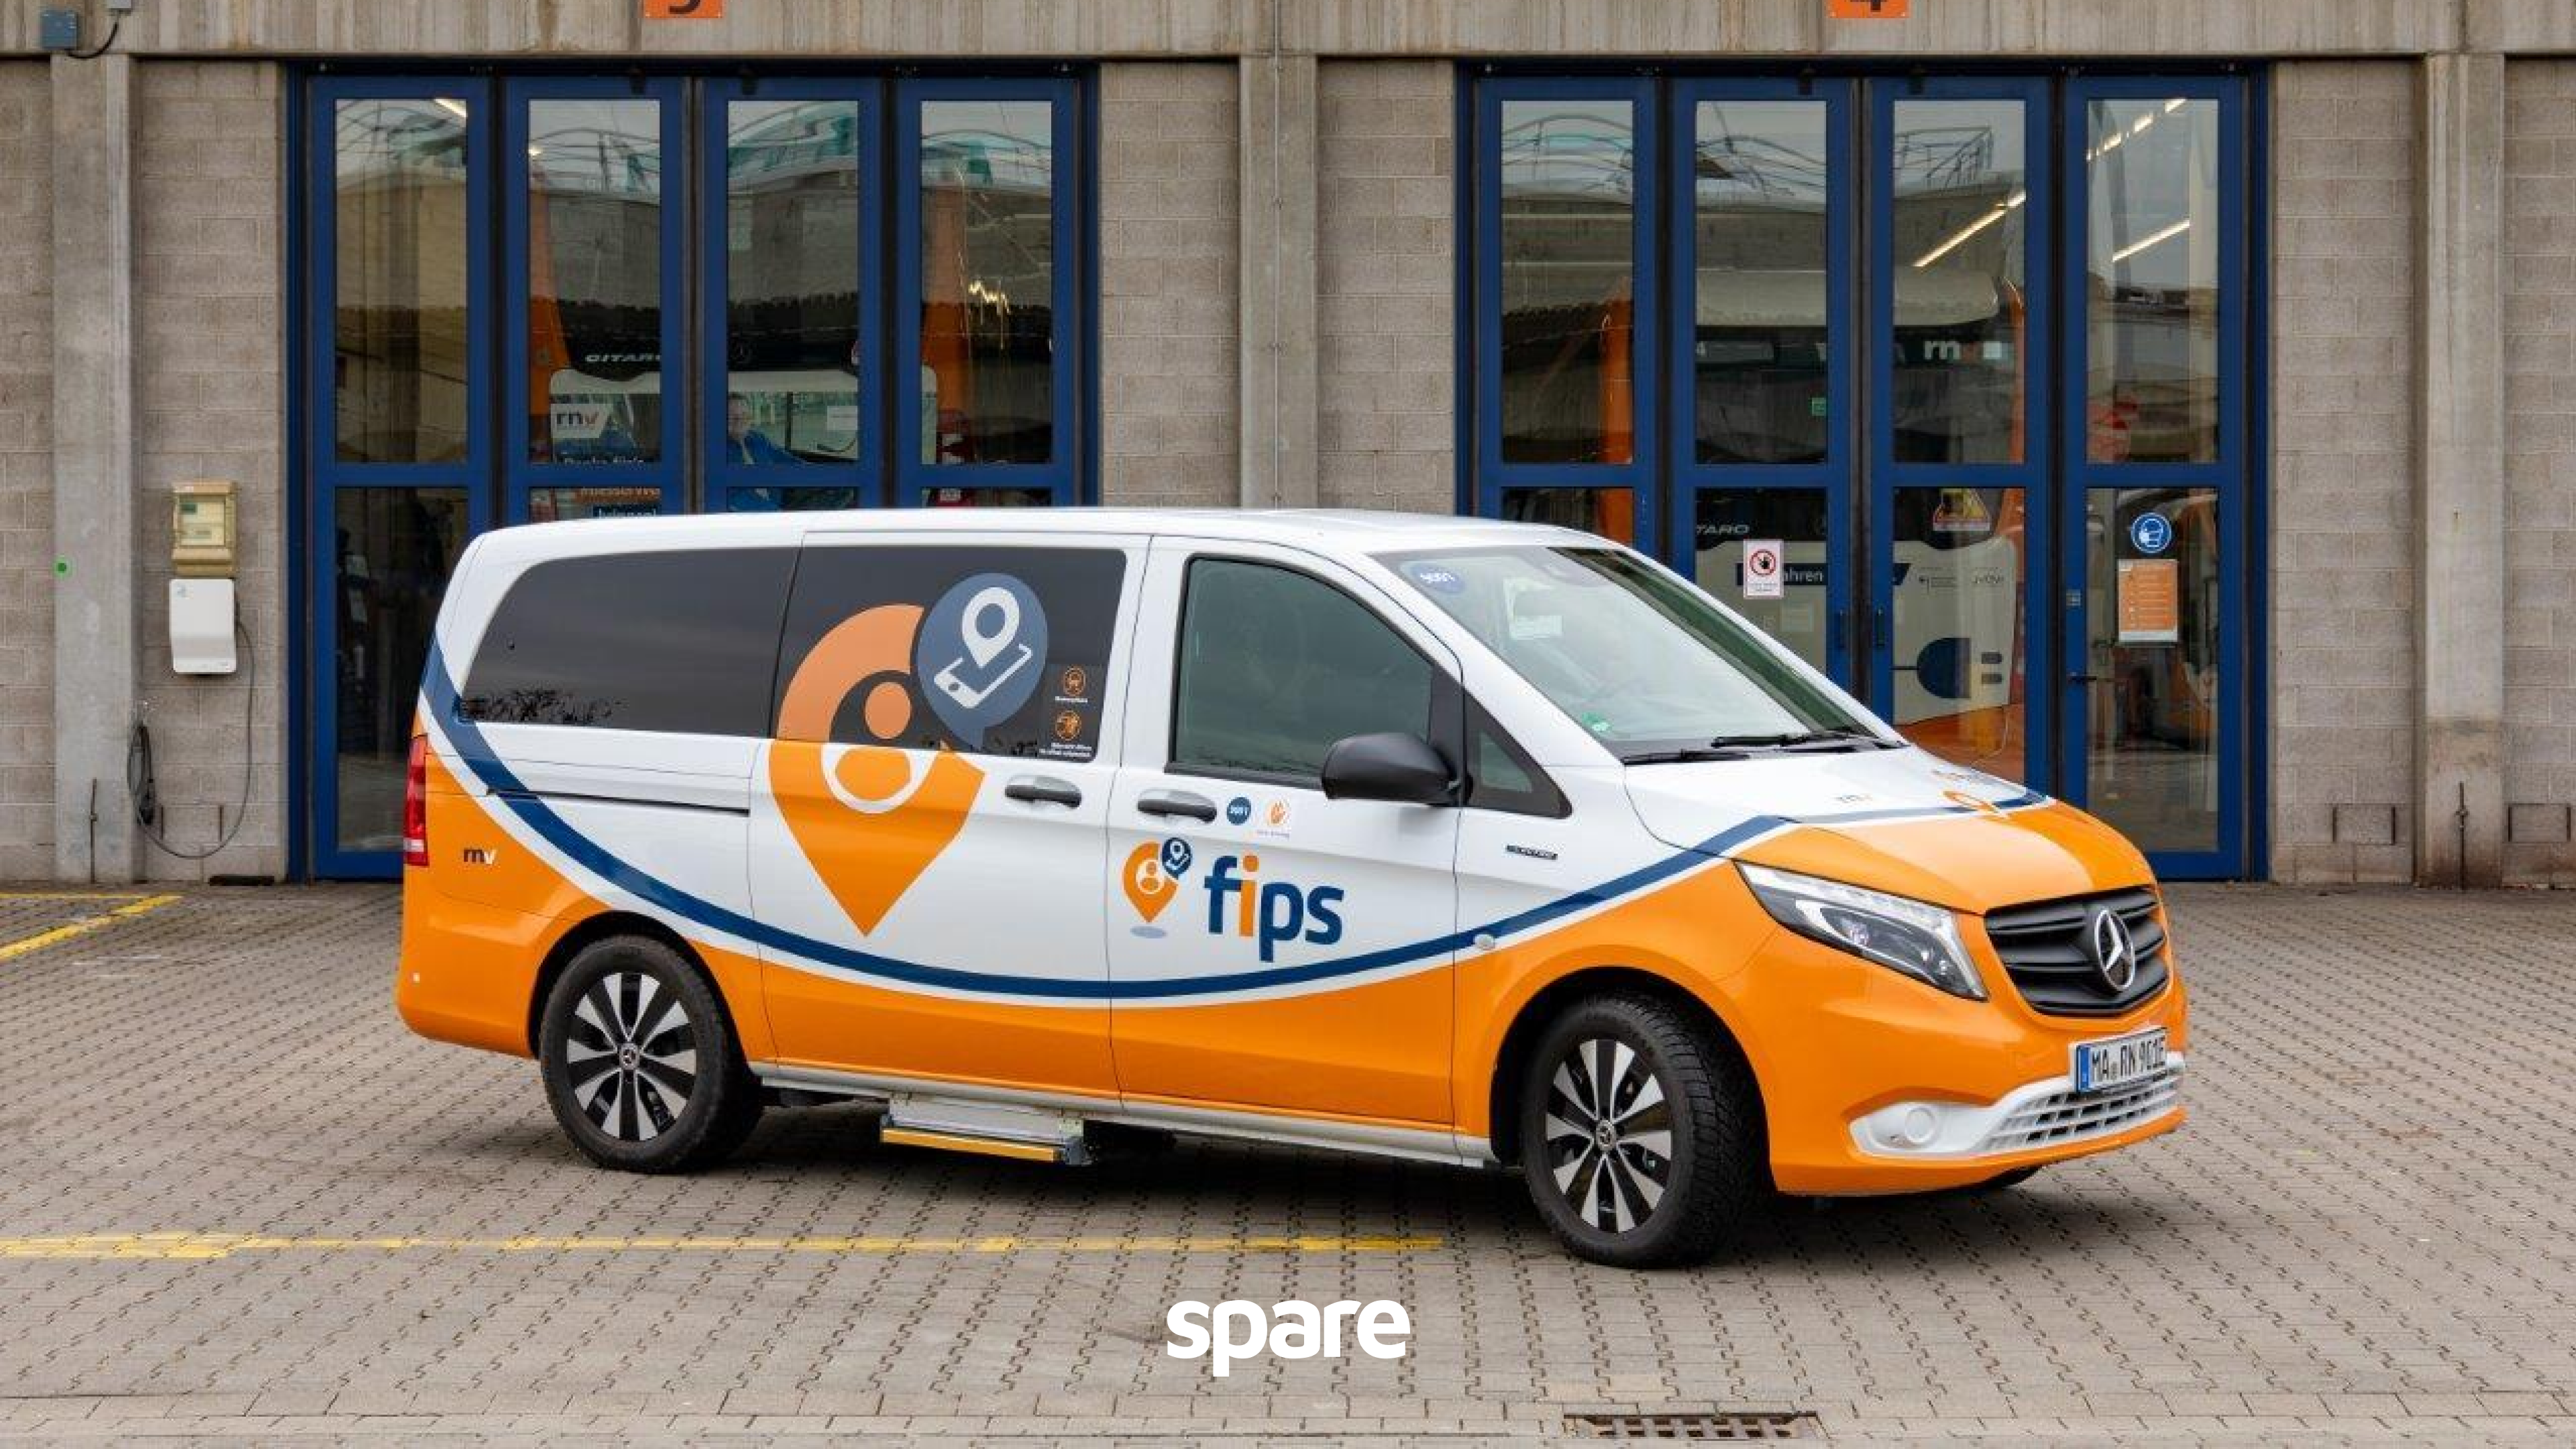 fips service vehicle